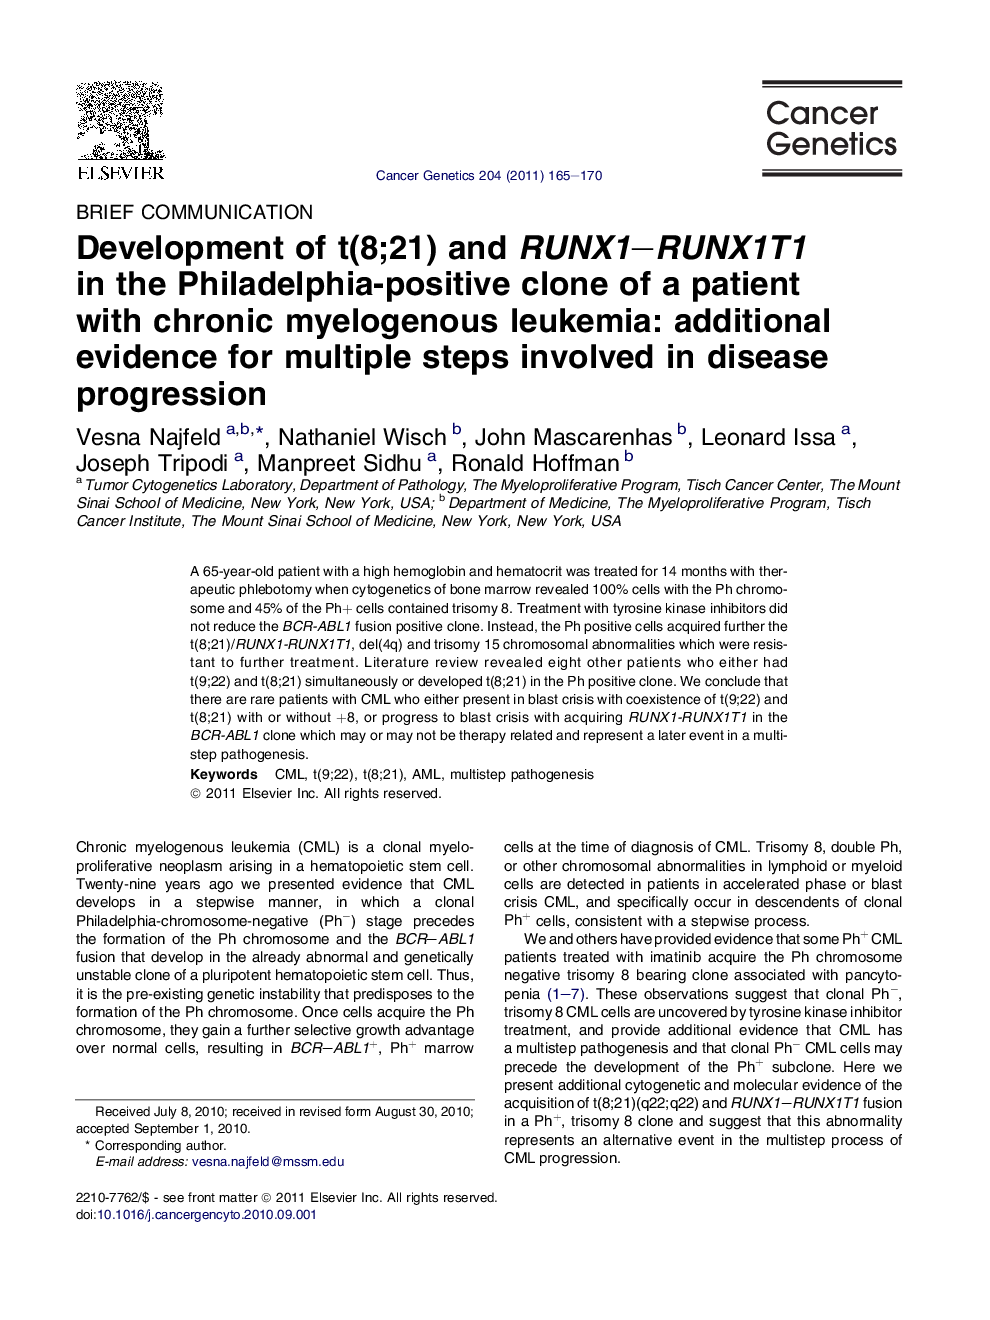 Development of t(8;21) and RUNX1–RUNX1T1 in the Philadelphia-positive clone of a patient with chronic myelogenous leukemia: additional evidence for multiple steps involved in disease progression